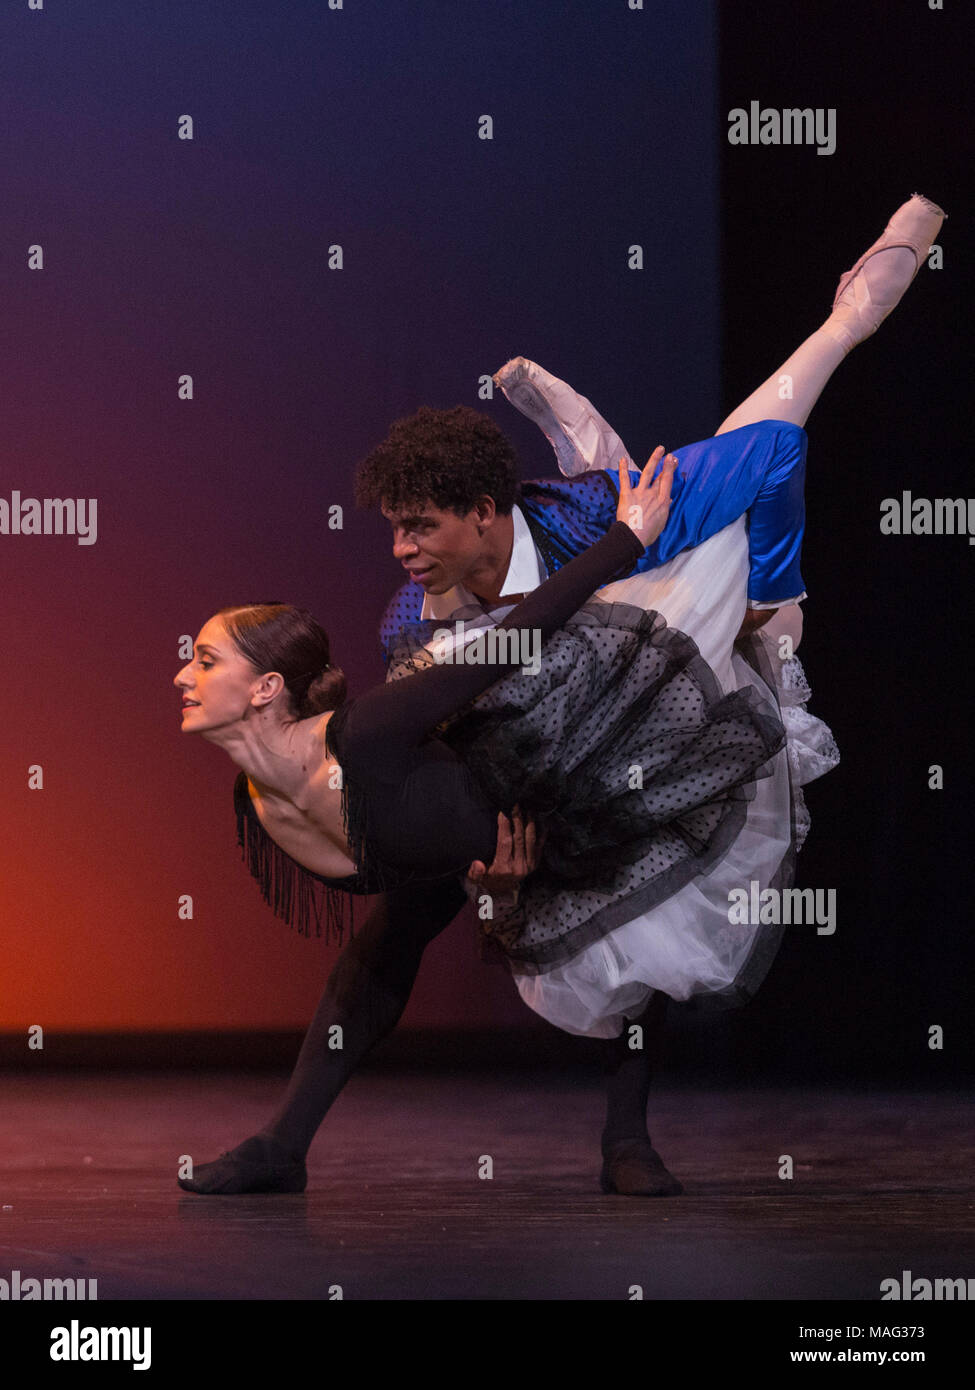 08/12/2015. London, UK. Pictured: Majisimo by Jose Garcia performed by Carlos Acosta with Marianela Nunez, Tierney Heap, Yuhui Choe, Anna Rose O'Sullivan, Thiago Soares, Varleri Hristov and Nehemiah Kish. Carlos Acosta performs a Classical Selection at the London Coliseum, 8 to 13 December 2015, presenting highlights from Carlos’ career in celebration of twenty-six years as a dancer on the London stage. Stock Photo